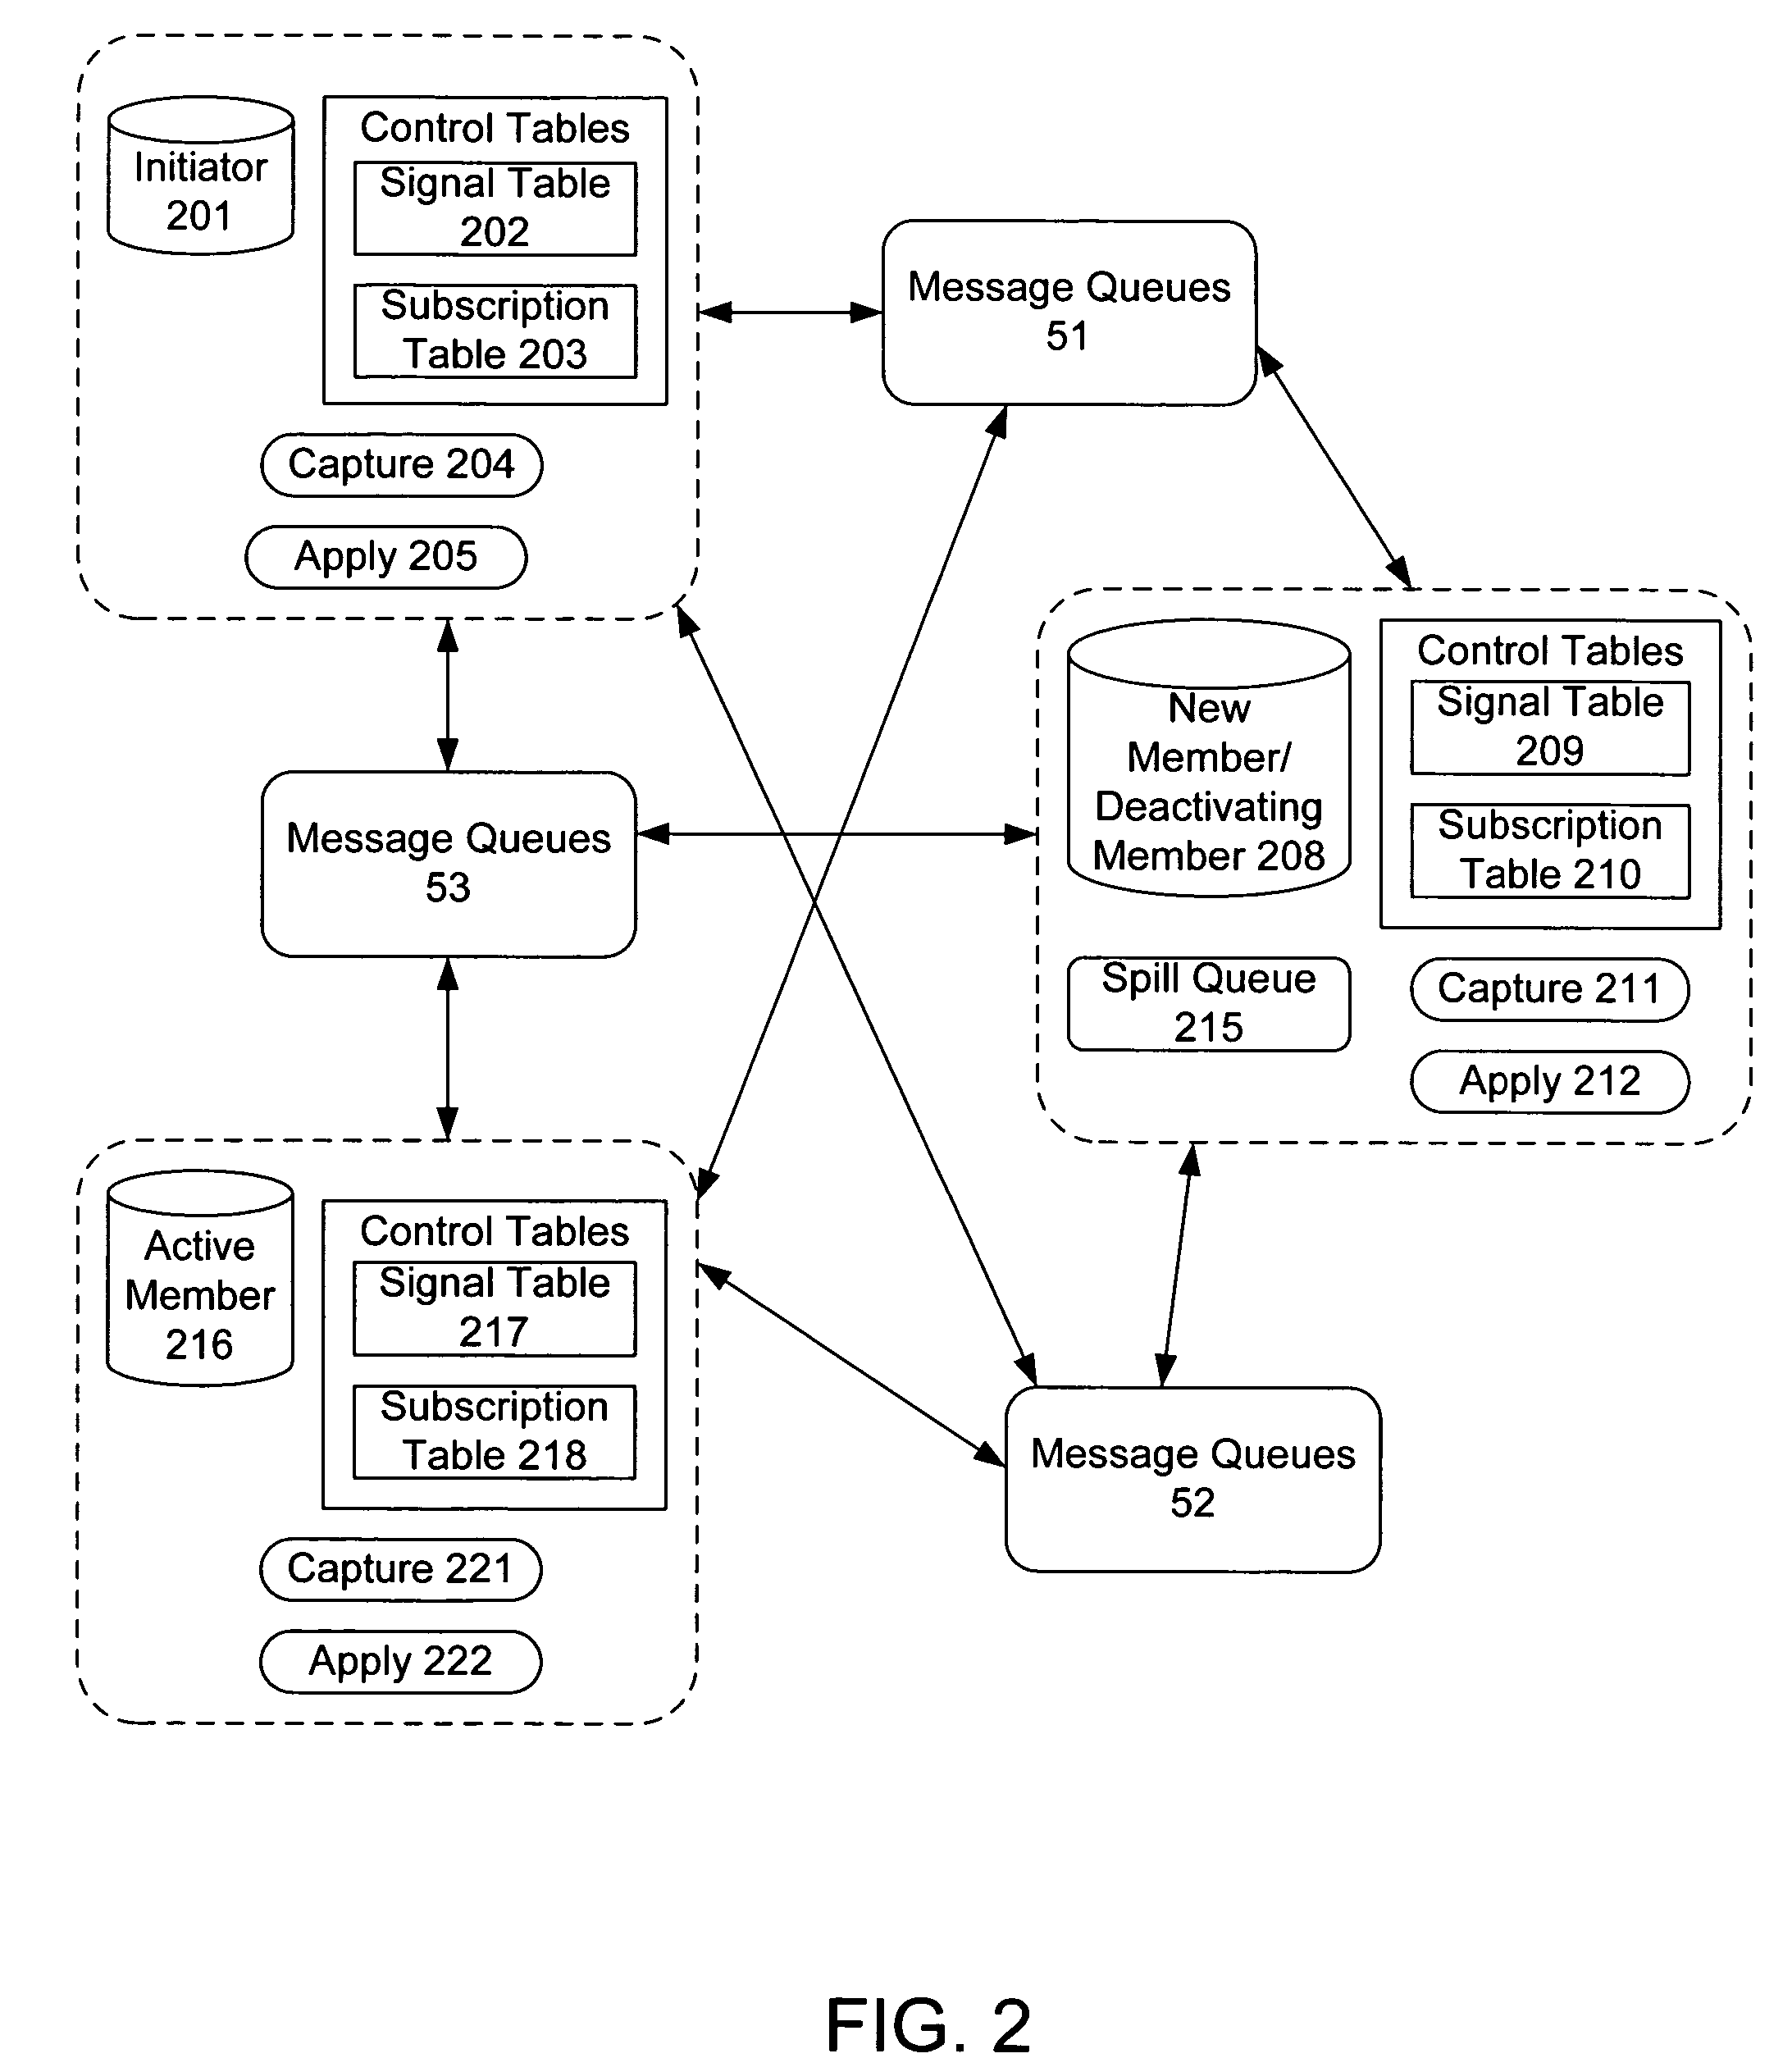 Peer-to-peer replication member initialization and deactivation